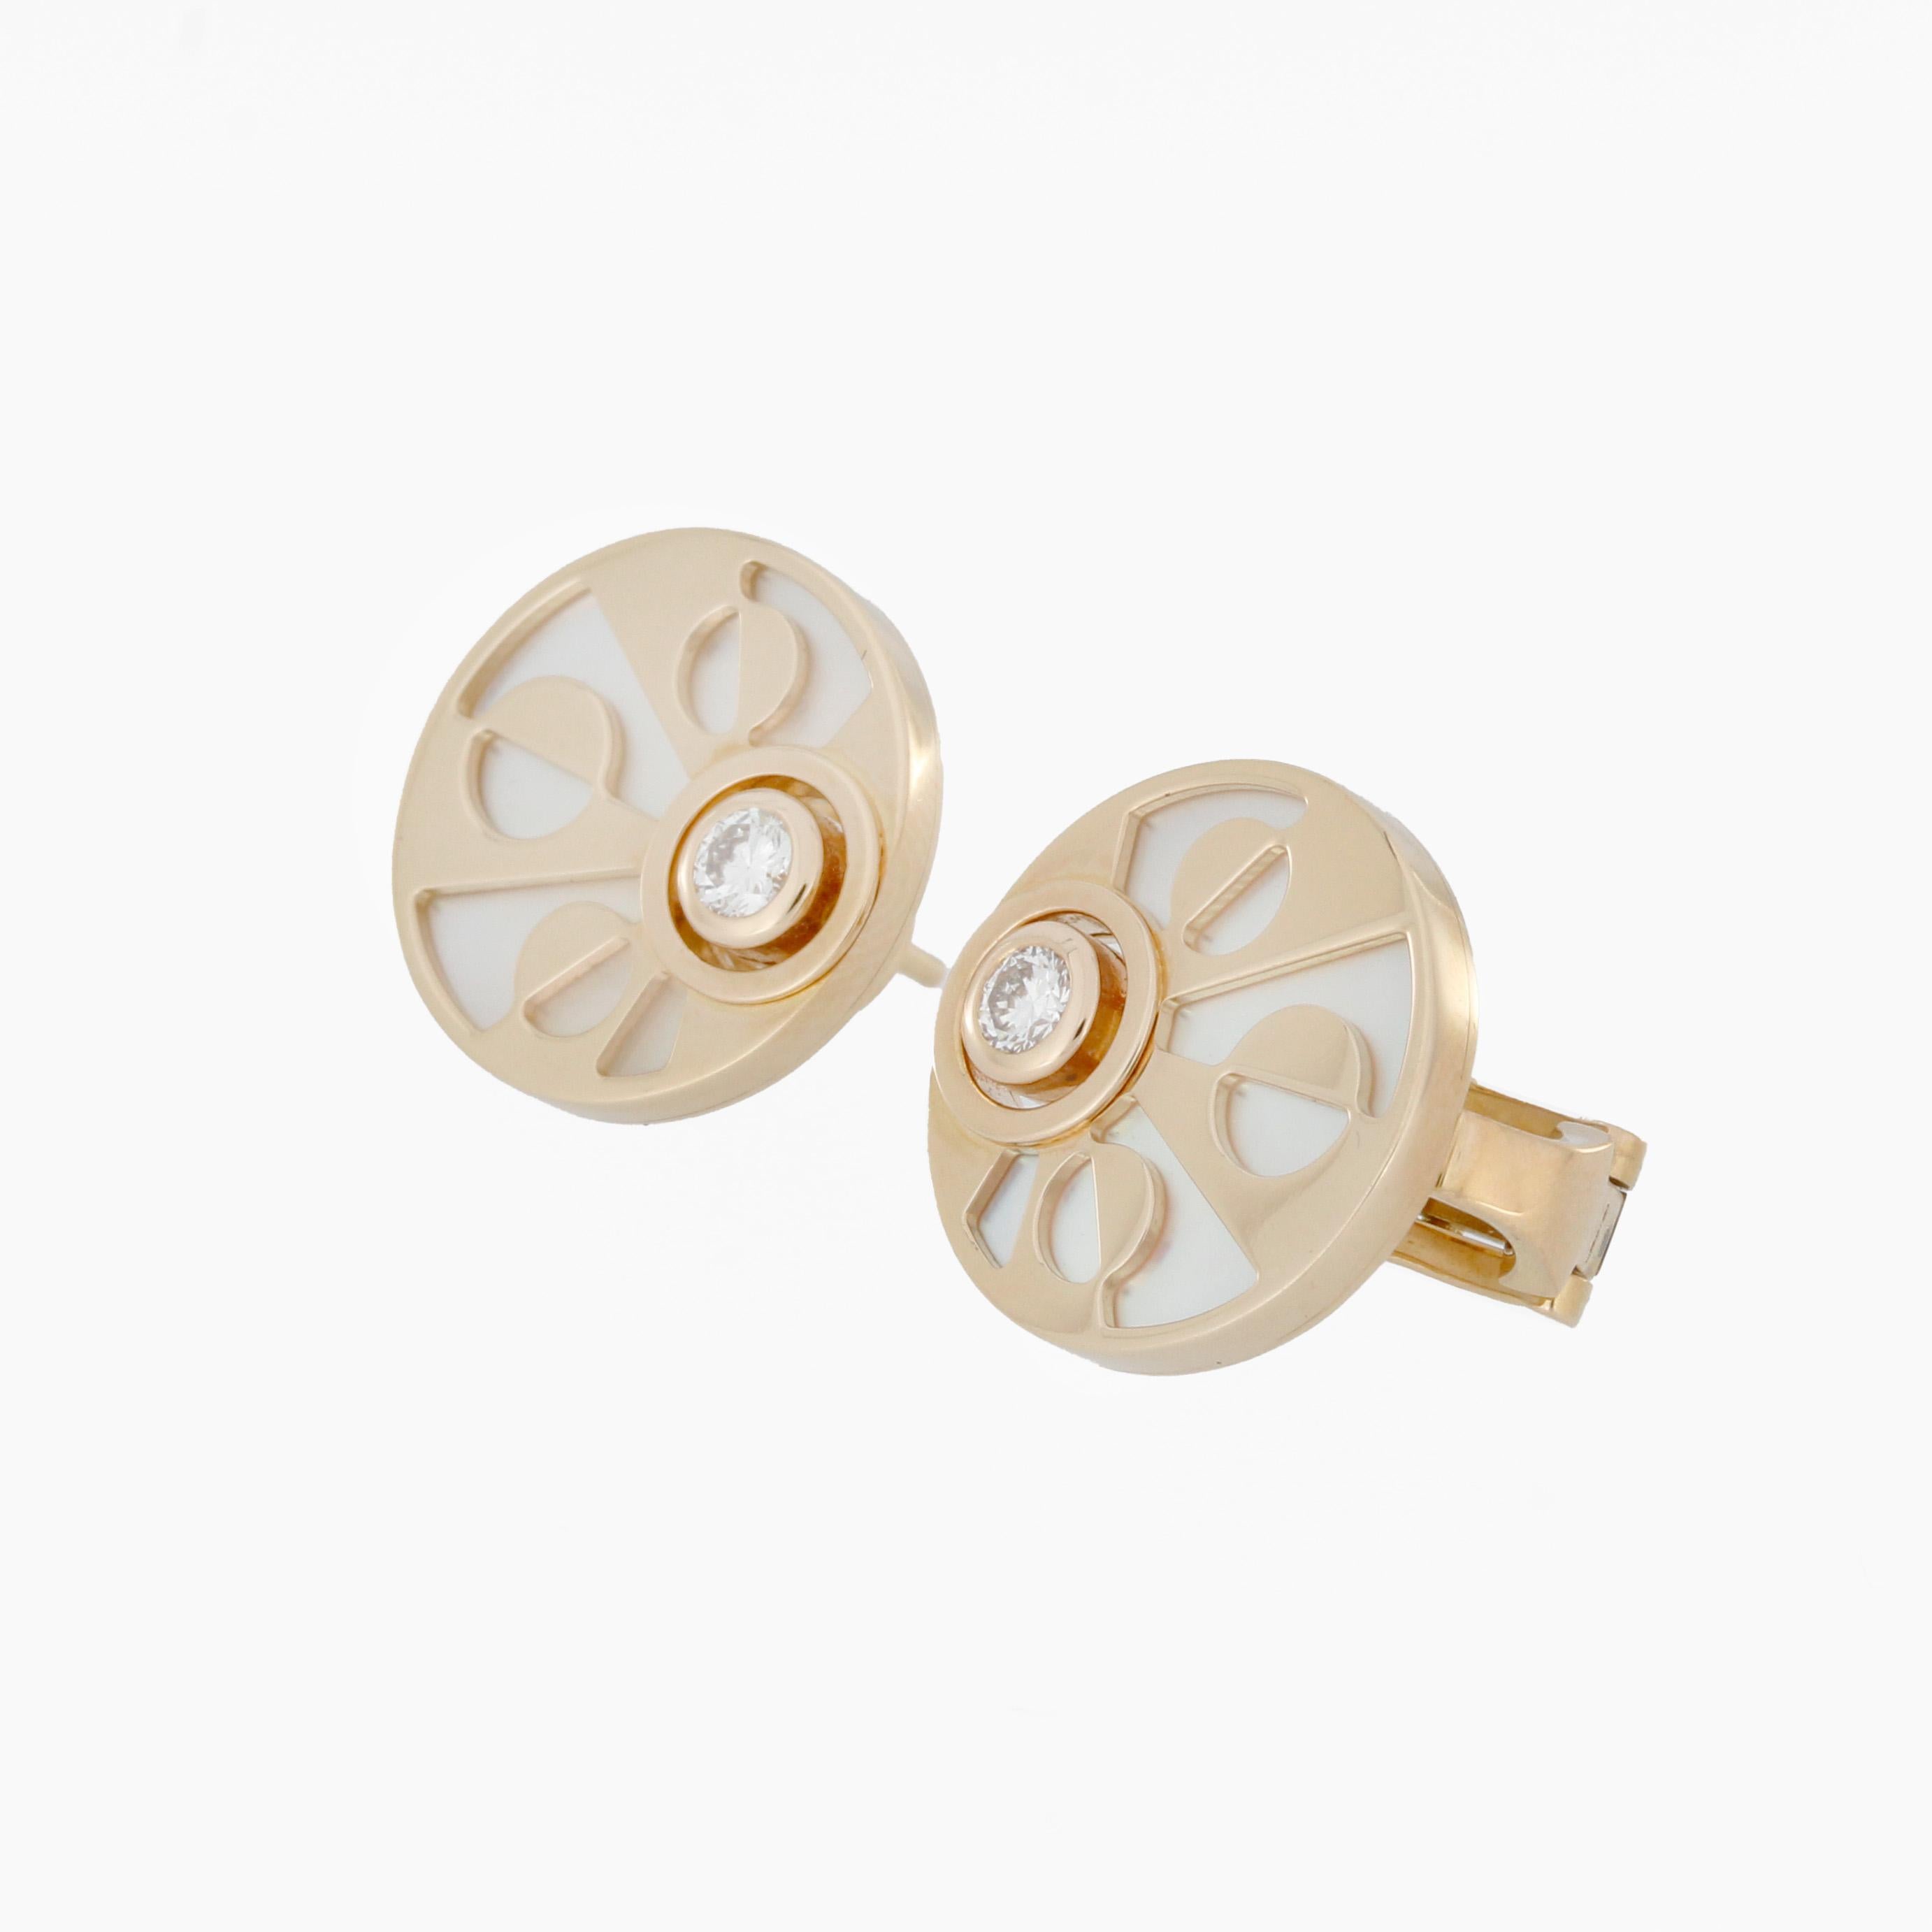 Bvlgari Intarsio Earrings in 18k rosegold and mother of pearl inserts.
2 Diamonds with a total of 0.21ct. Diamonds
Original Box & Certificate from 2013